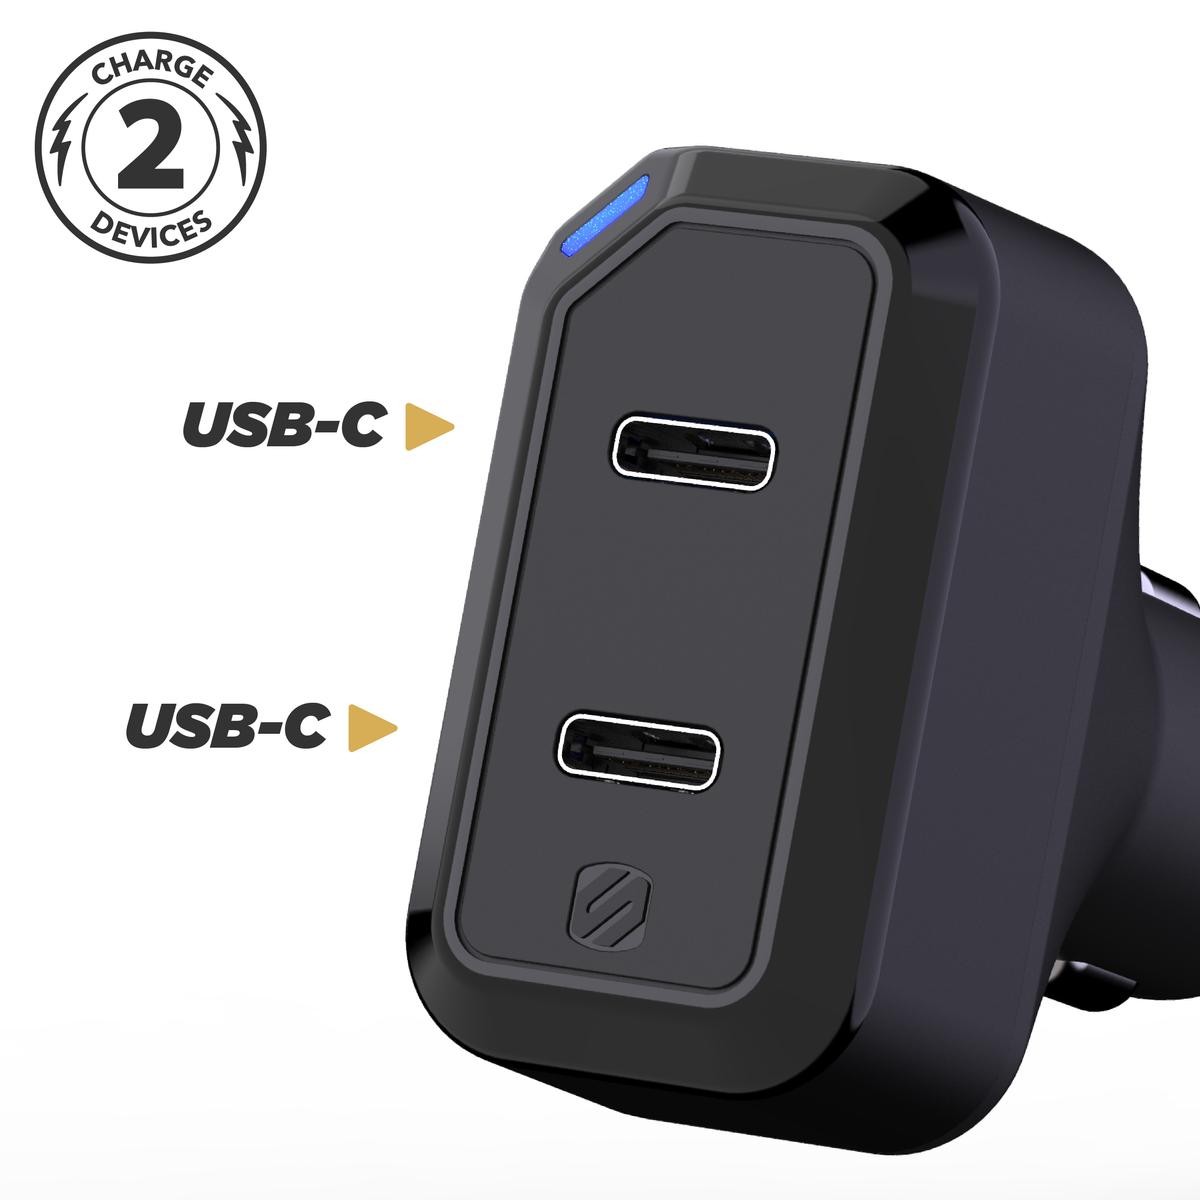 USB car charger SCOSCHE 8094 rating